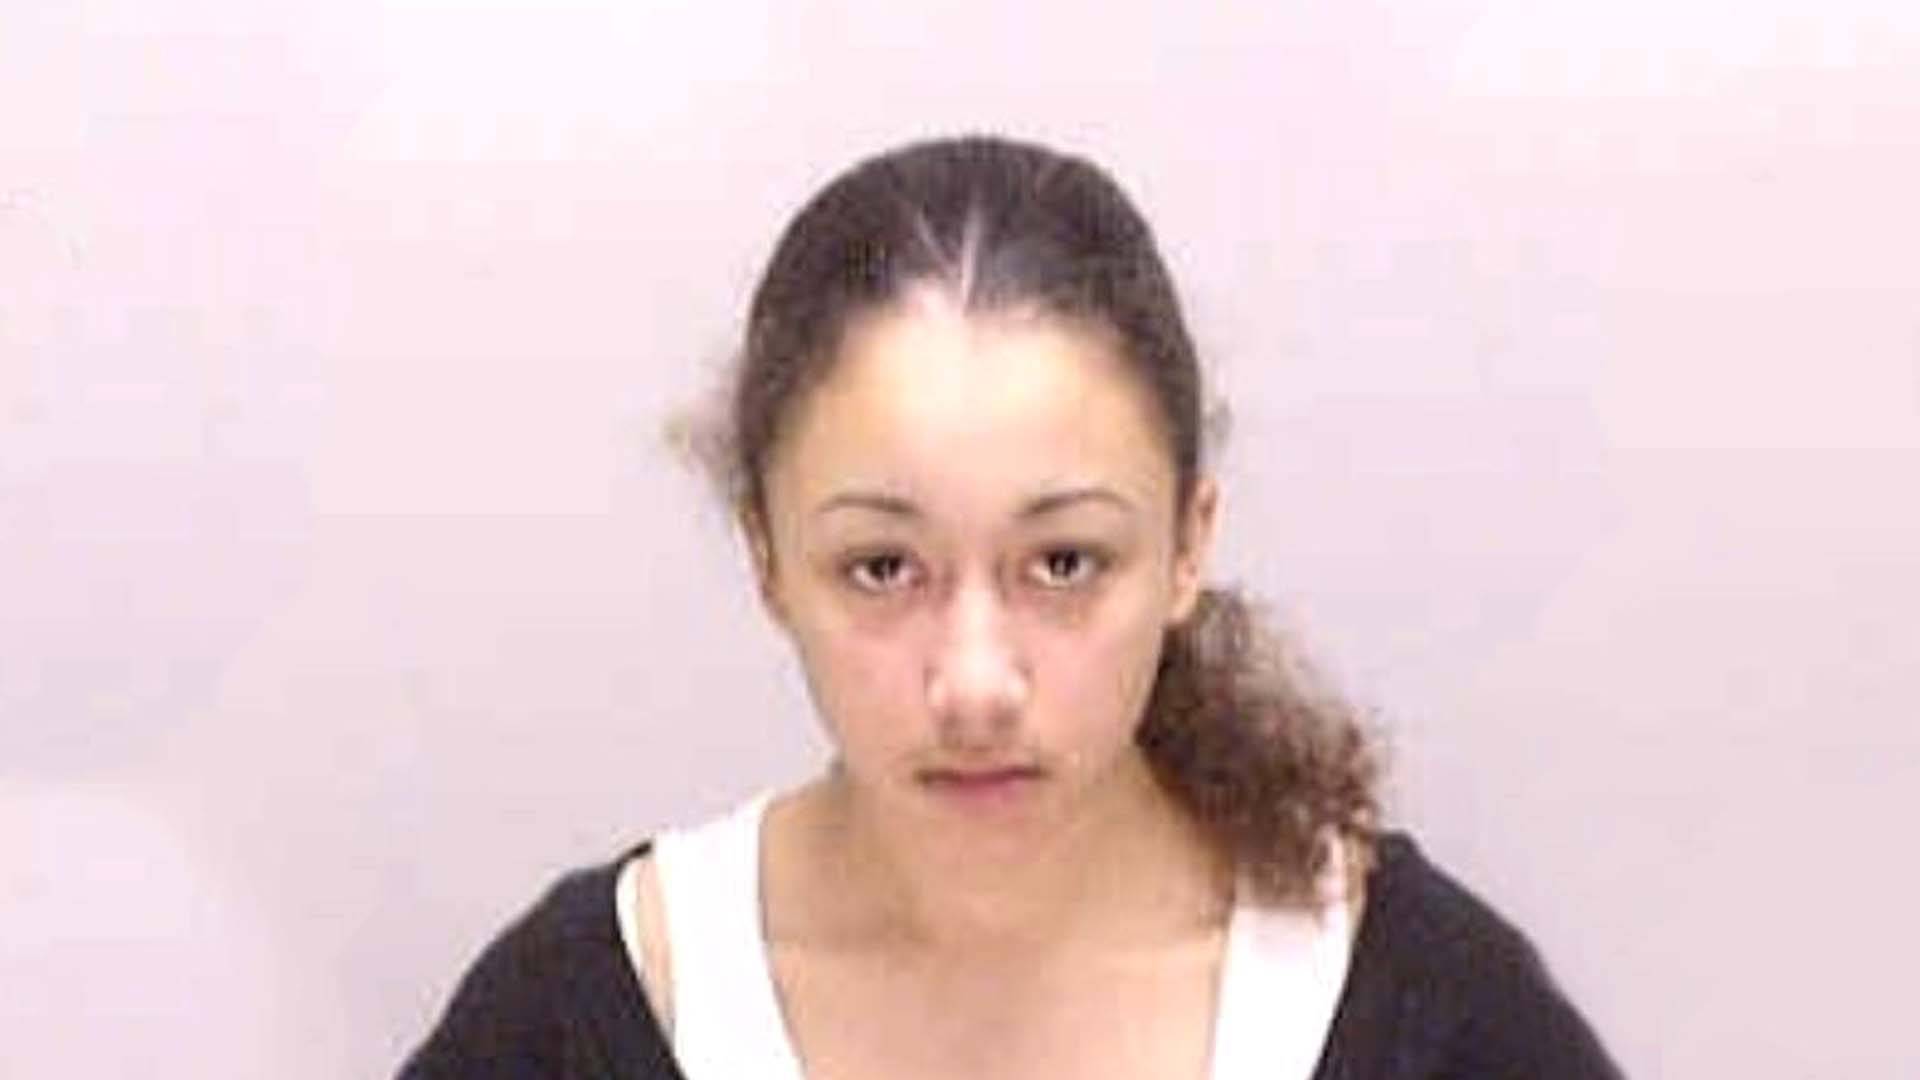 Cyntoia Brown Is Serving A Life Sentence For Killing A Man While Trying To Escape The Horrors Of 